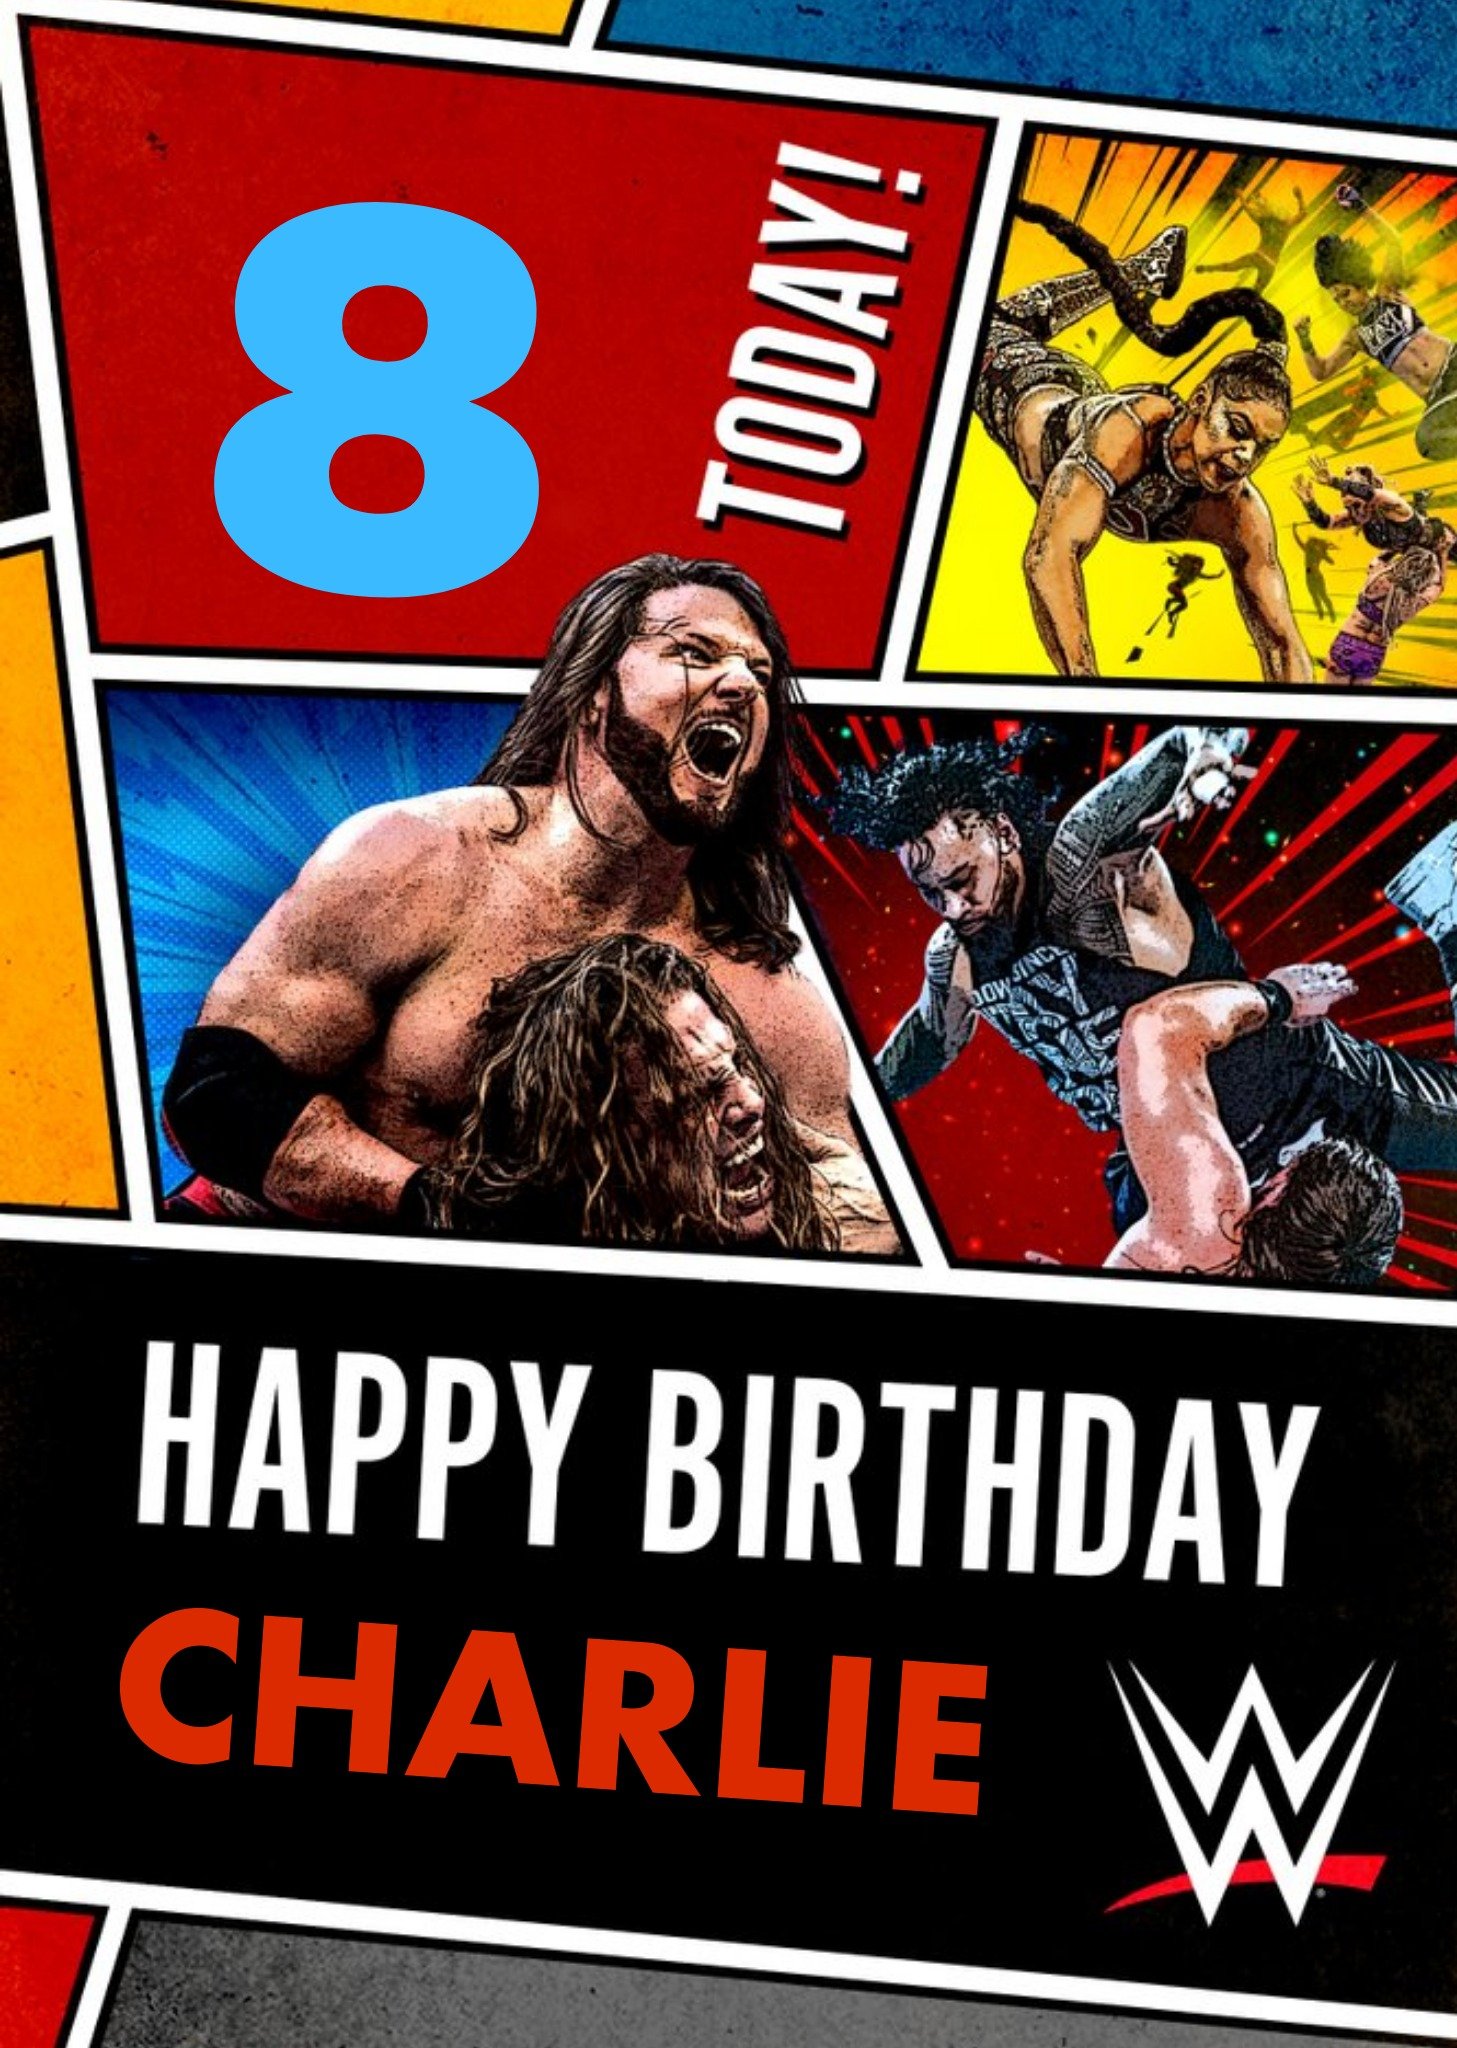 Wwe Wrestlers 8 Today Birthday Card, Large